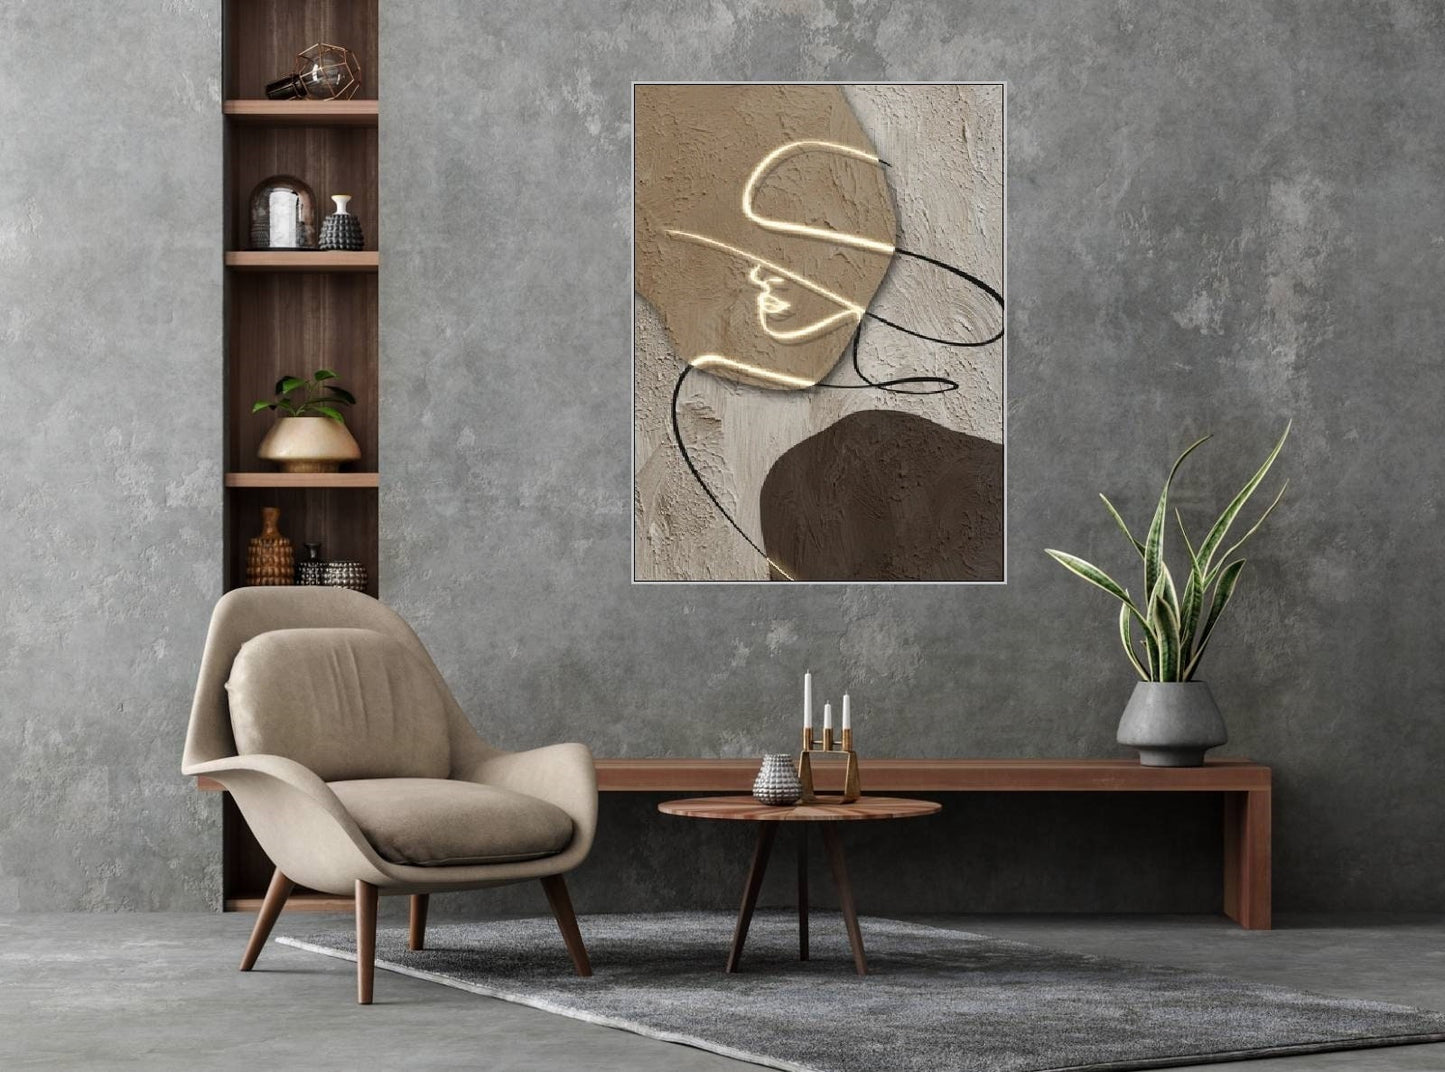 Large one line wall art, abstract floater frame canvas print, grey brown hanging wall decor, fashion vertical artwork, living room wall art